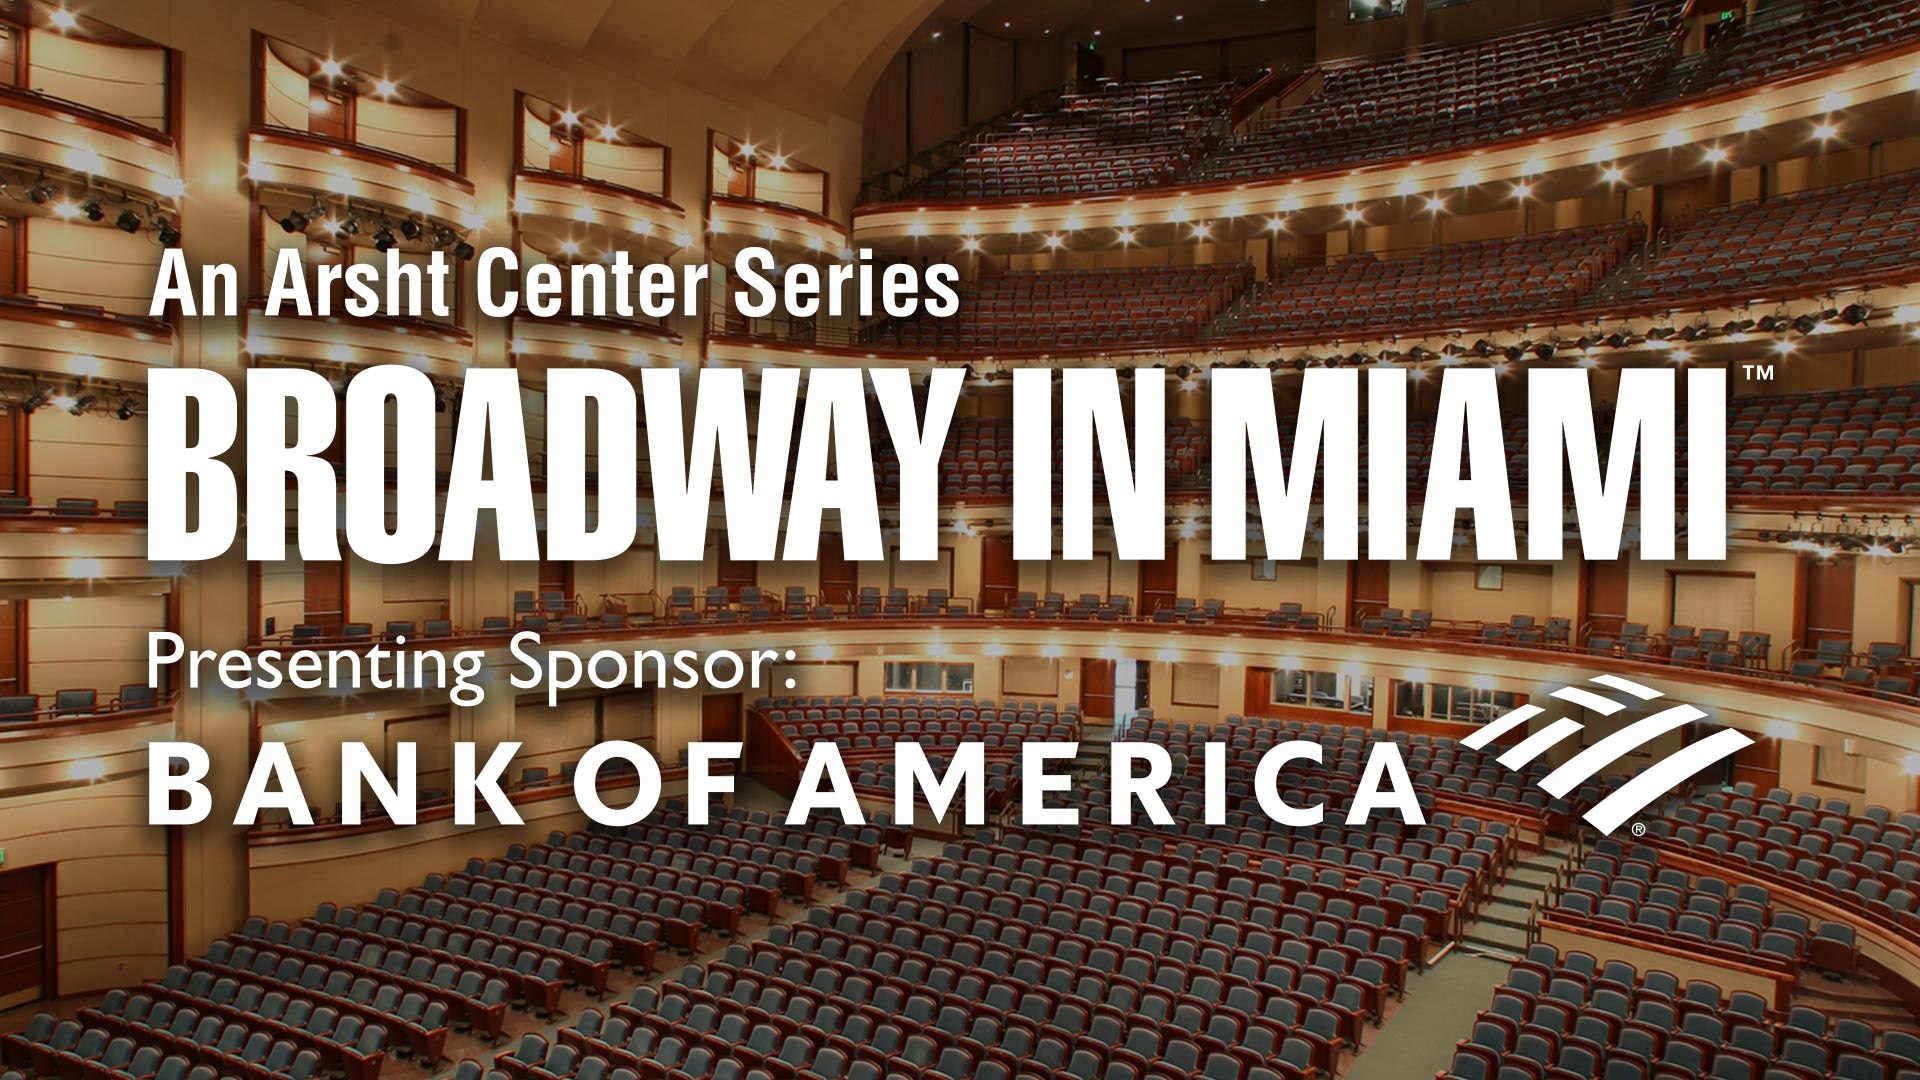 Broadway in Miami presented by Bank of America - An Arsht Center Serires logo overlaid on a photo of the Ziff Ballet Opera House at the Adrienne Arsht Center for the Performing Arts of Miami-Dade County